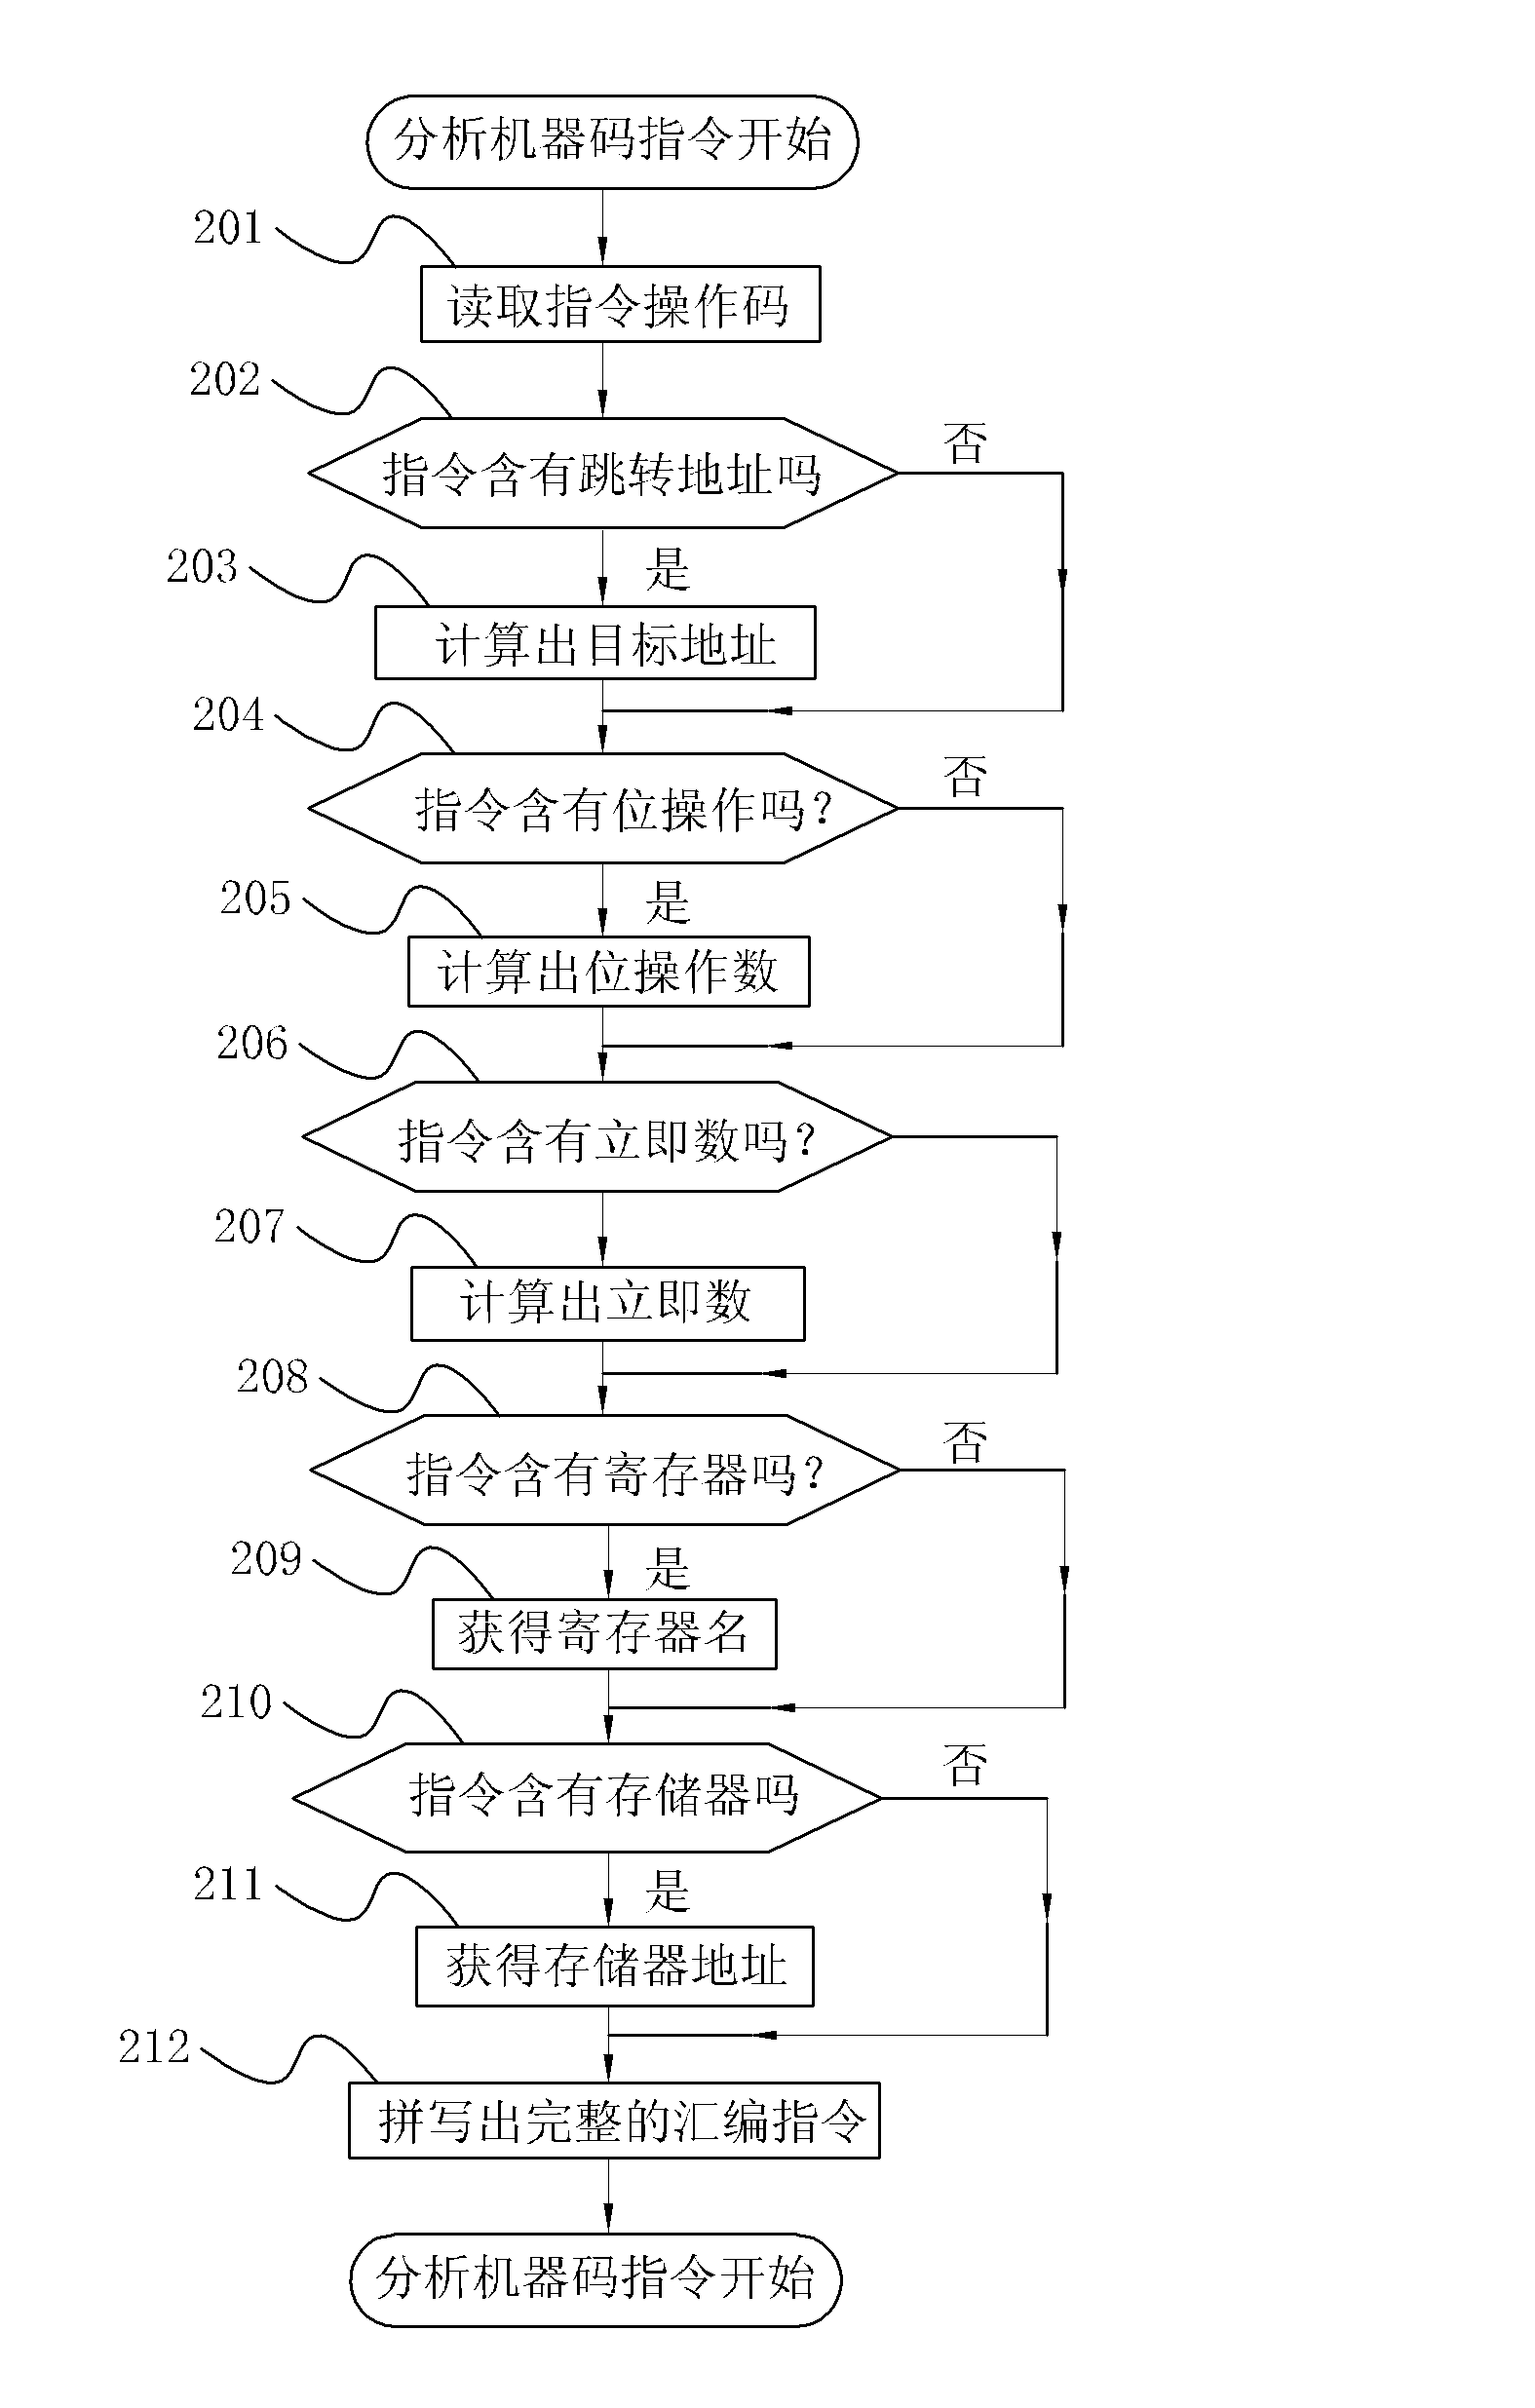 Disassembling method for single-chip microcomputer